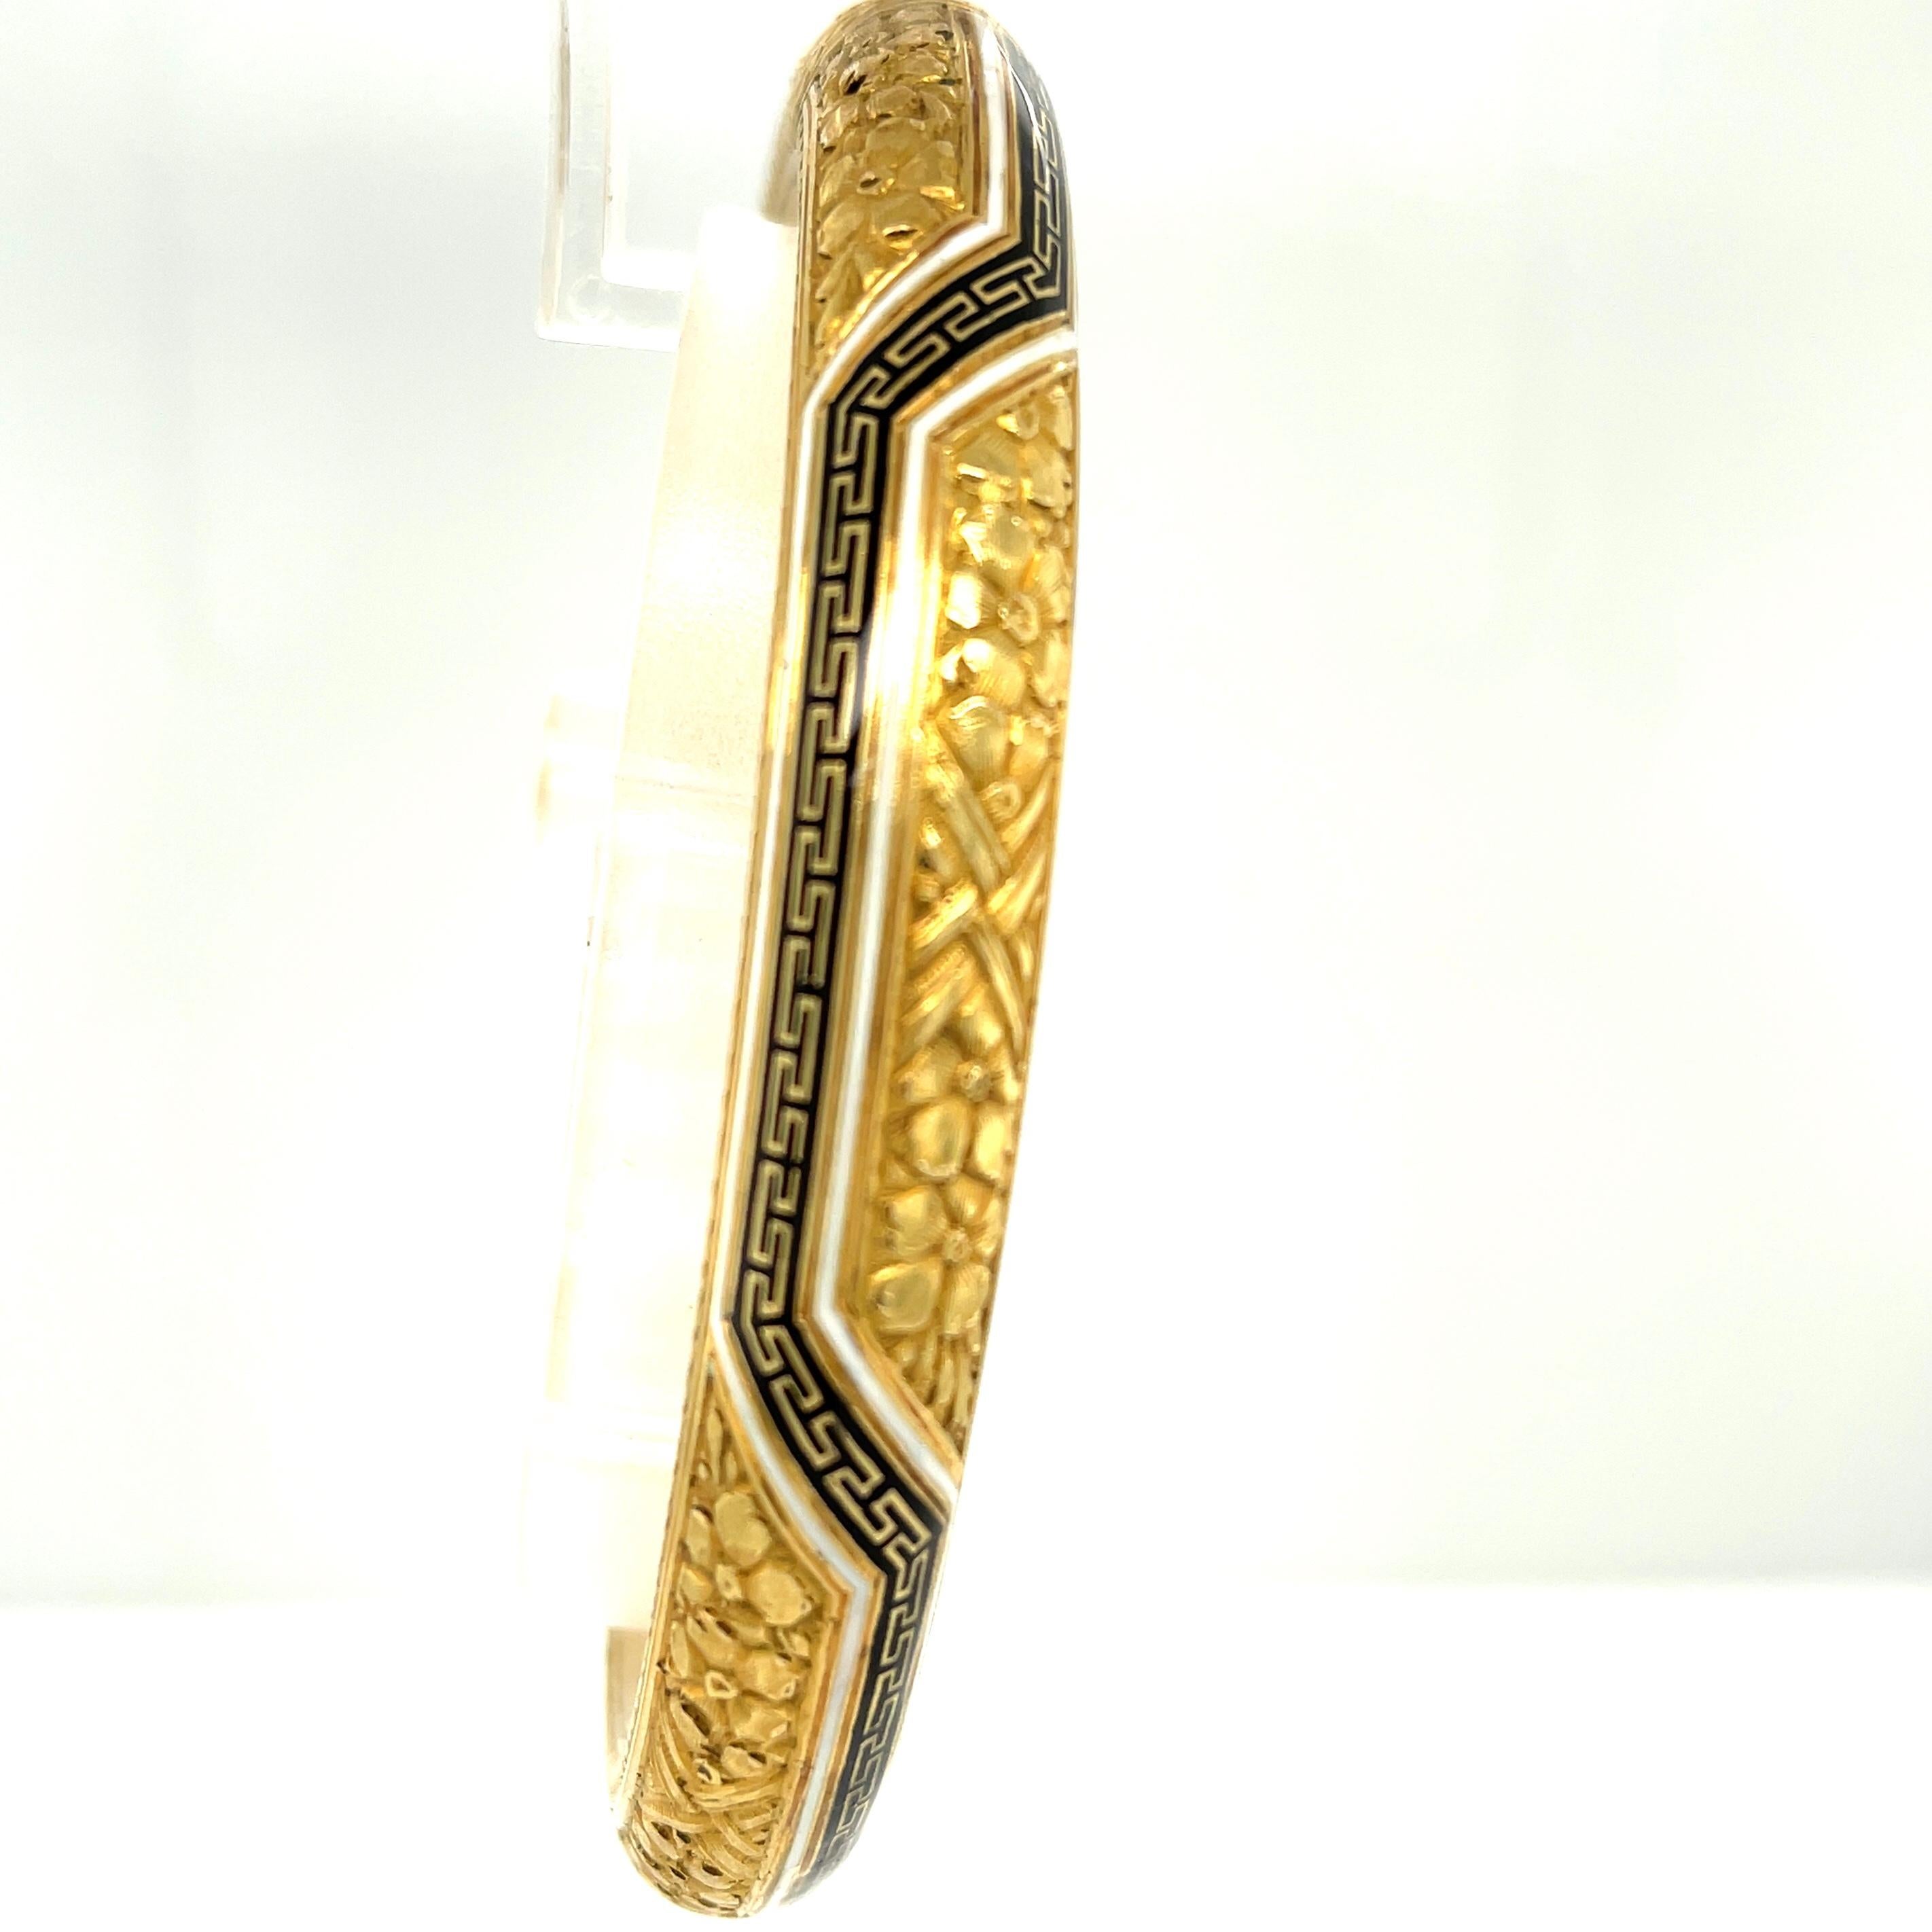 A rare 18k yellow gold hollow form bangle bracelet with beautiful engraving and  white and black enamel accents, circa 1880. This oval shaped bangle has a nice tubular width, with incredible craftsmanship. The engraving depicts five petal flowers